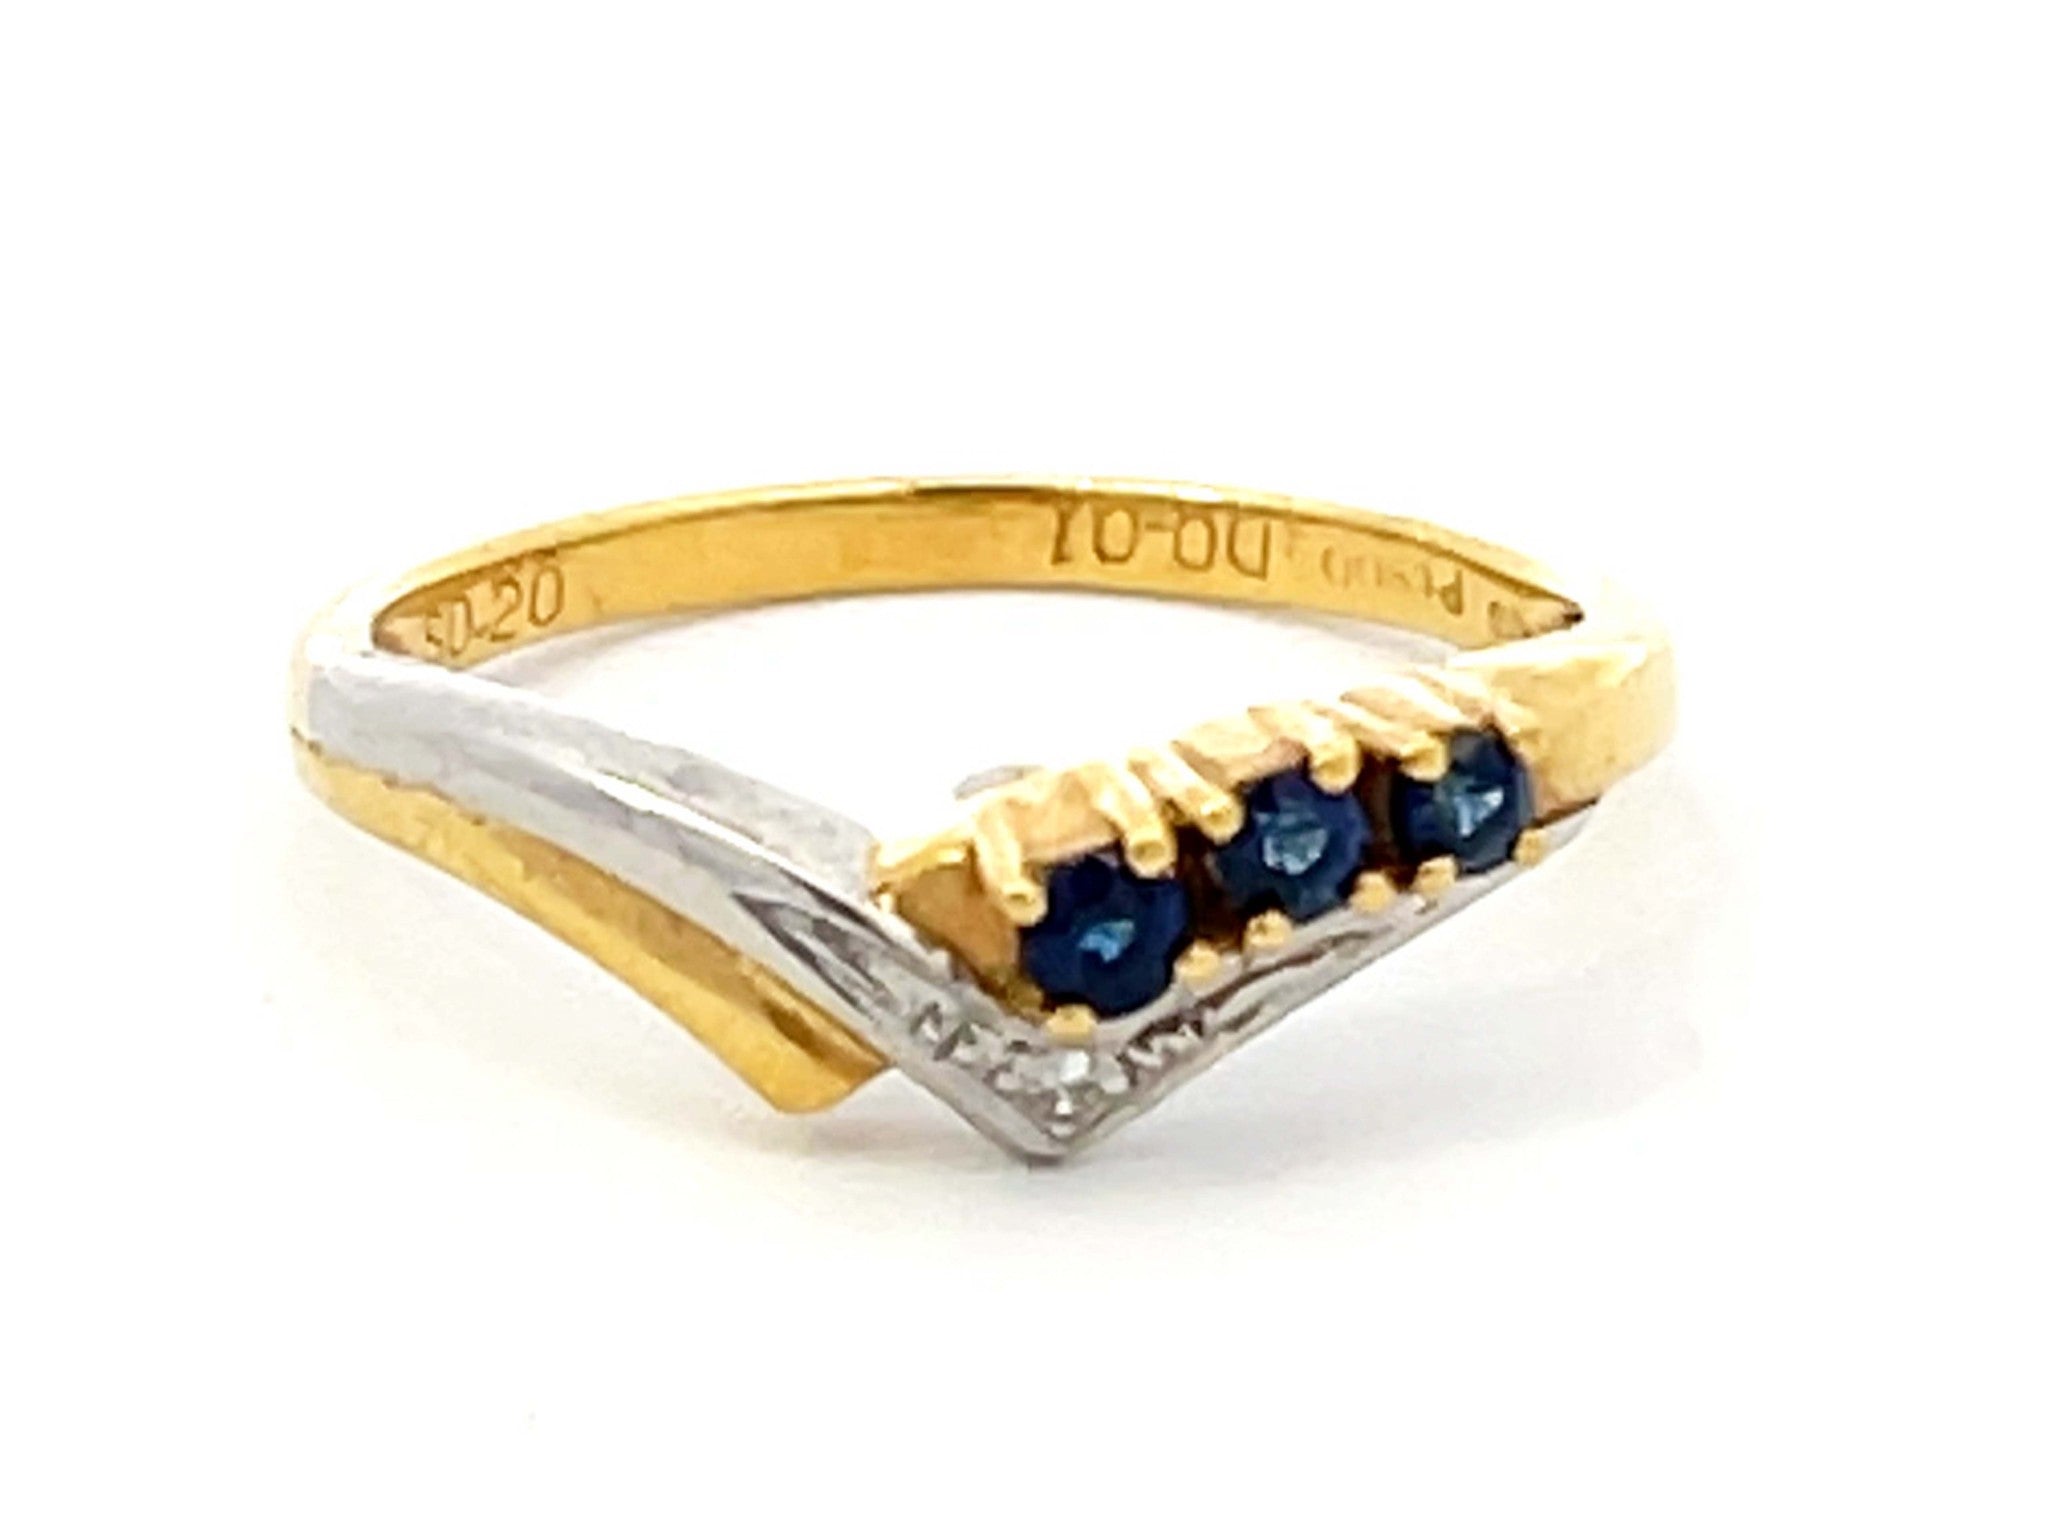 Two Toned V Shaped Sapphire and Diamond Ring in 18k Yellow Gold and Platinum